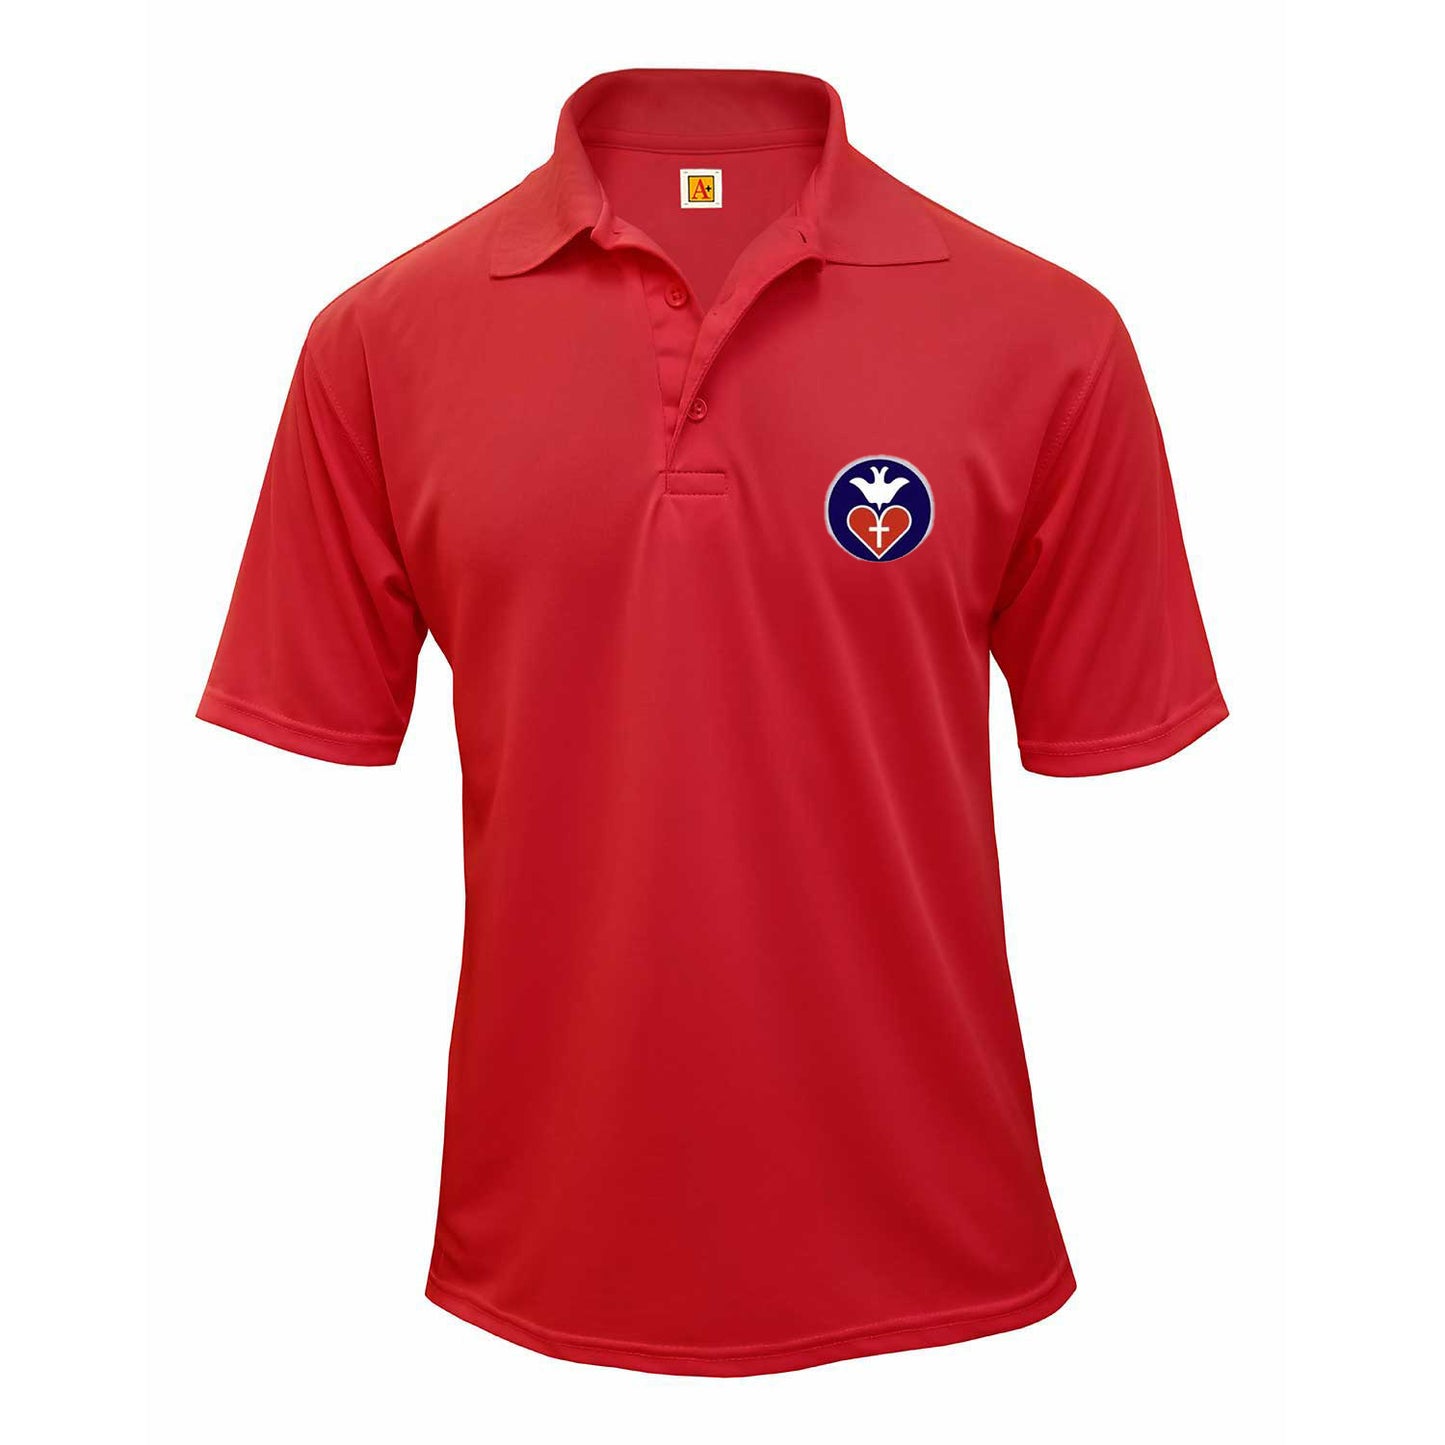 Youth Short Sleeve Performace Polo With St. Vincent De Paul Logo